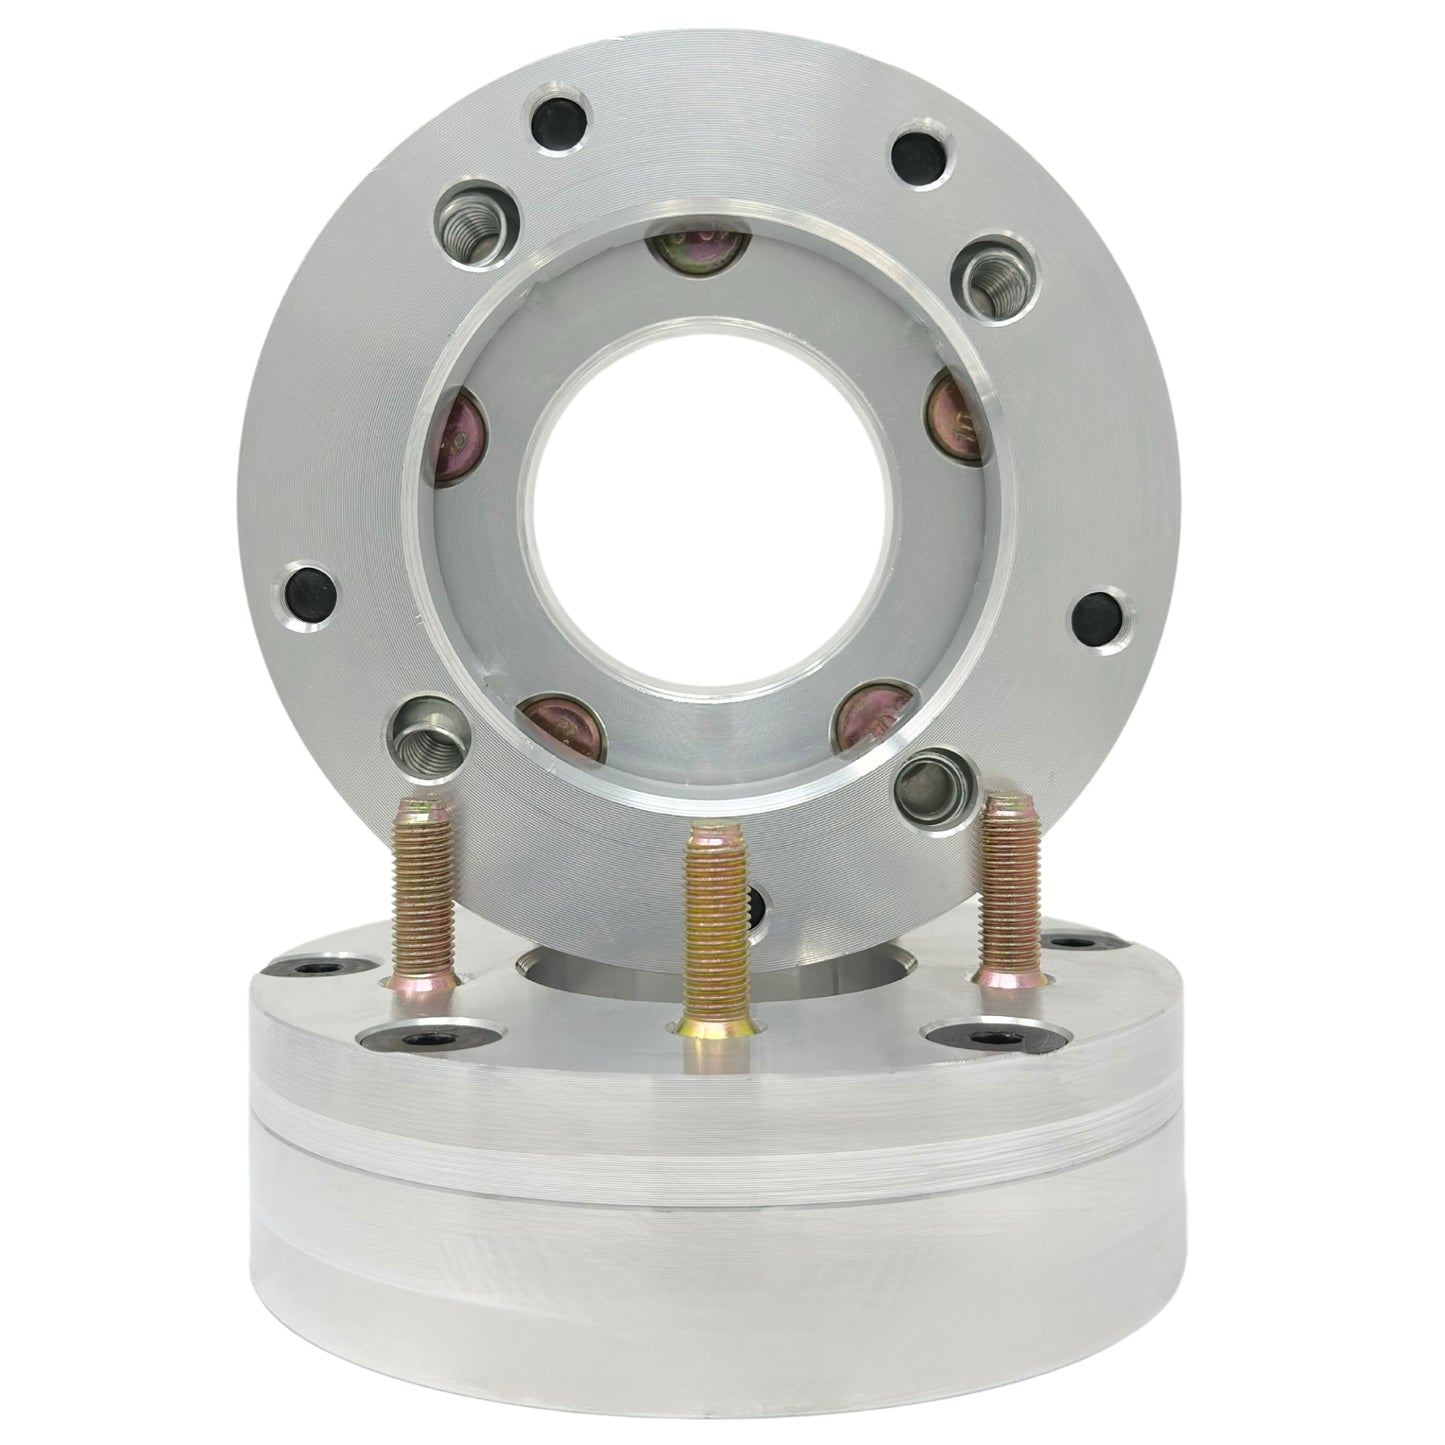 4x137 to 5x110 2 piece Wheel Adapter - Thickness: 1.5" - 3"